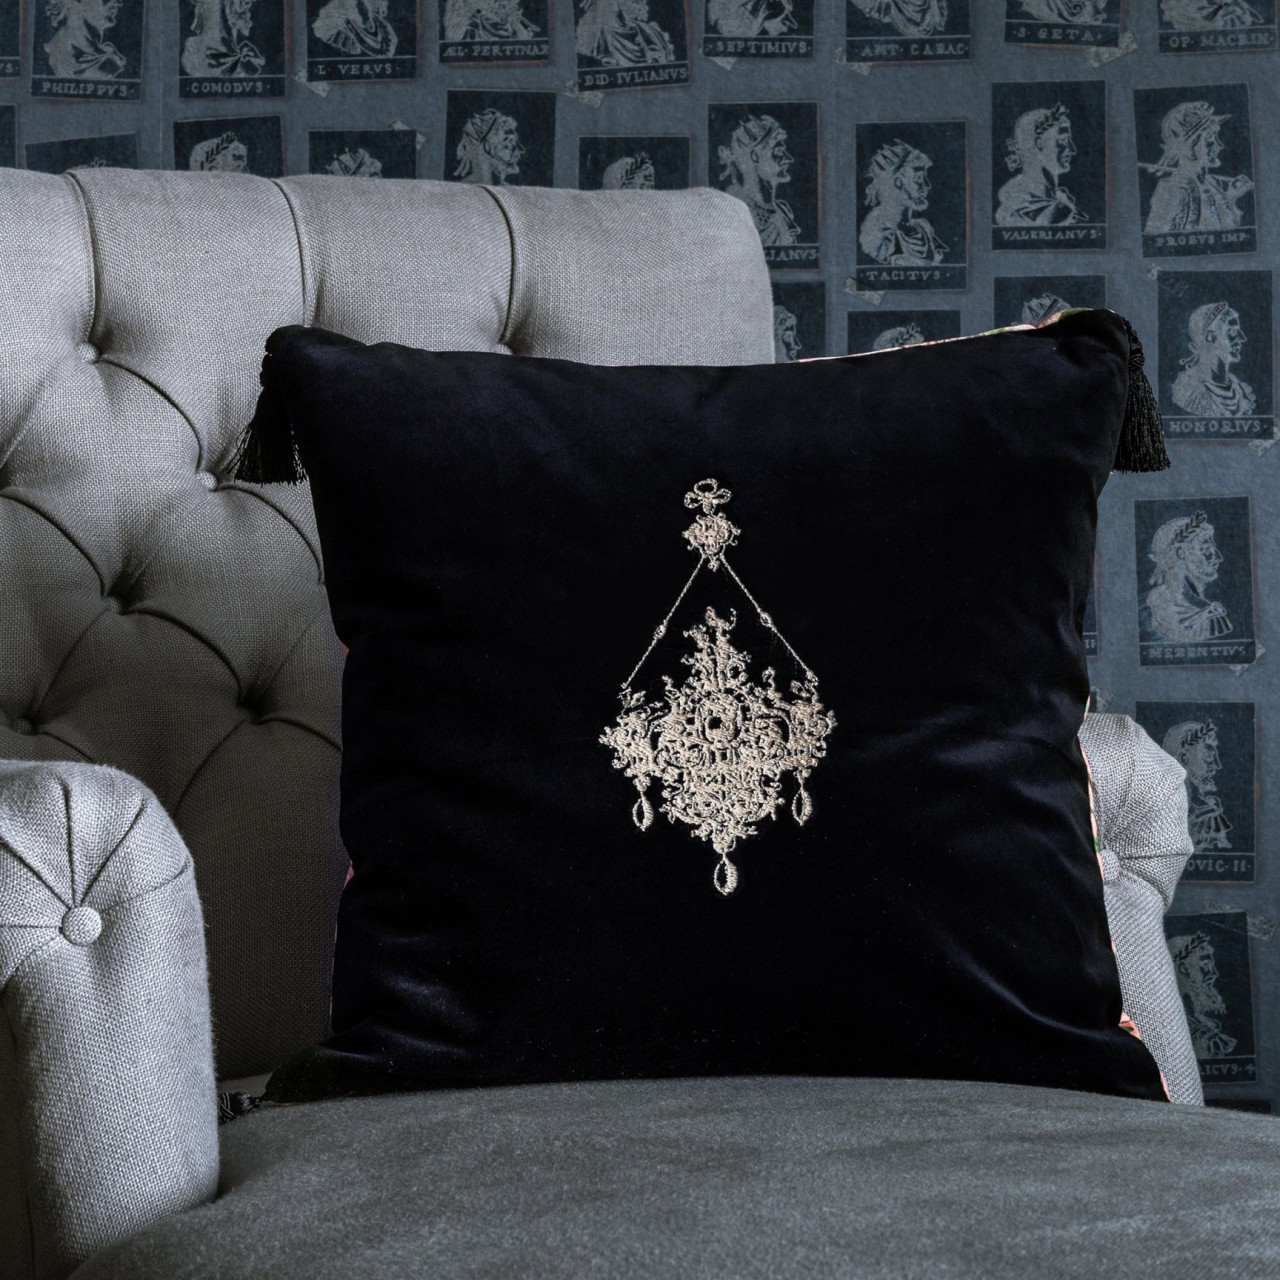 GEMME EMBROIDERY Velvet Embroidered Cushion